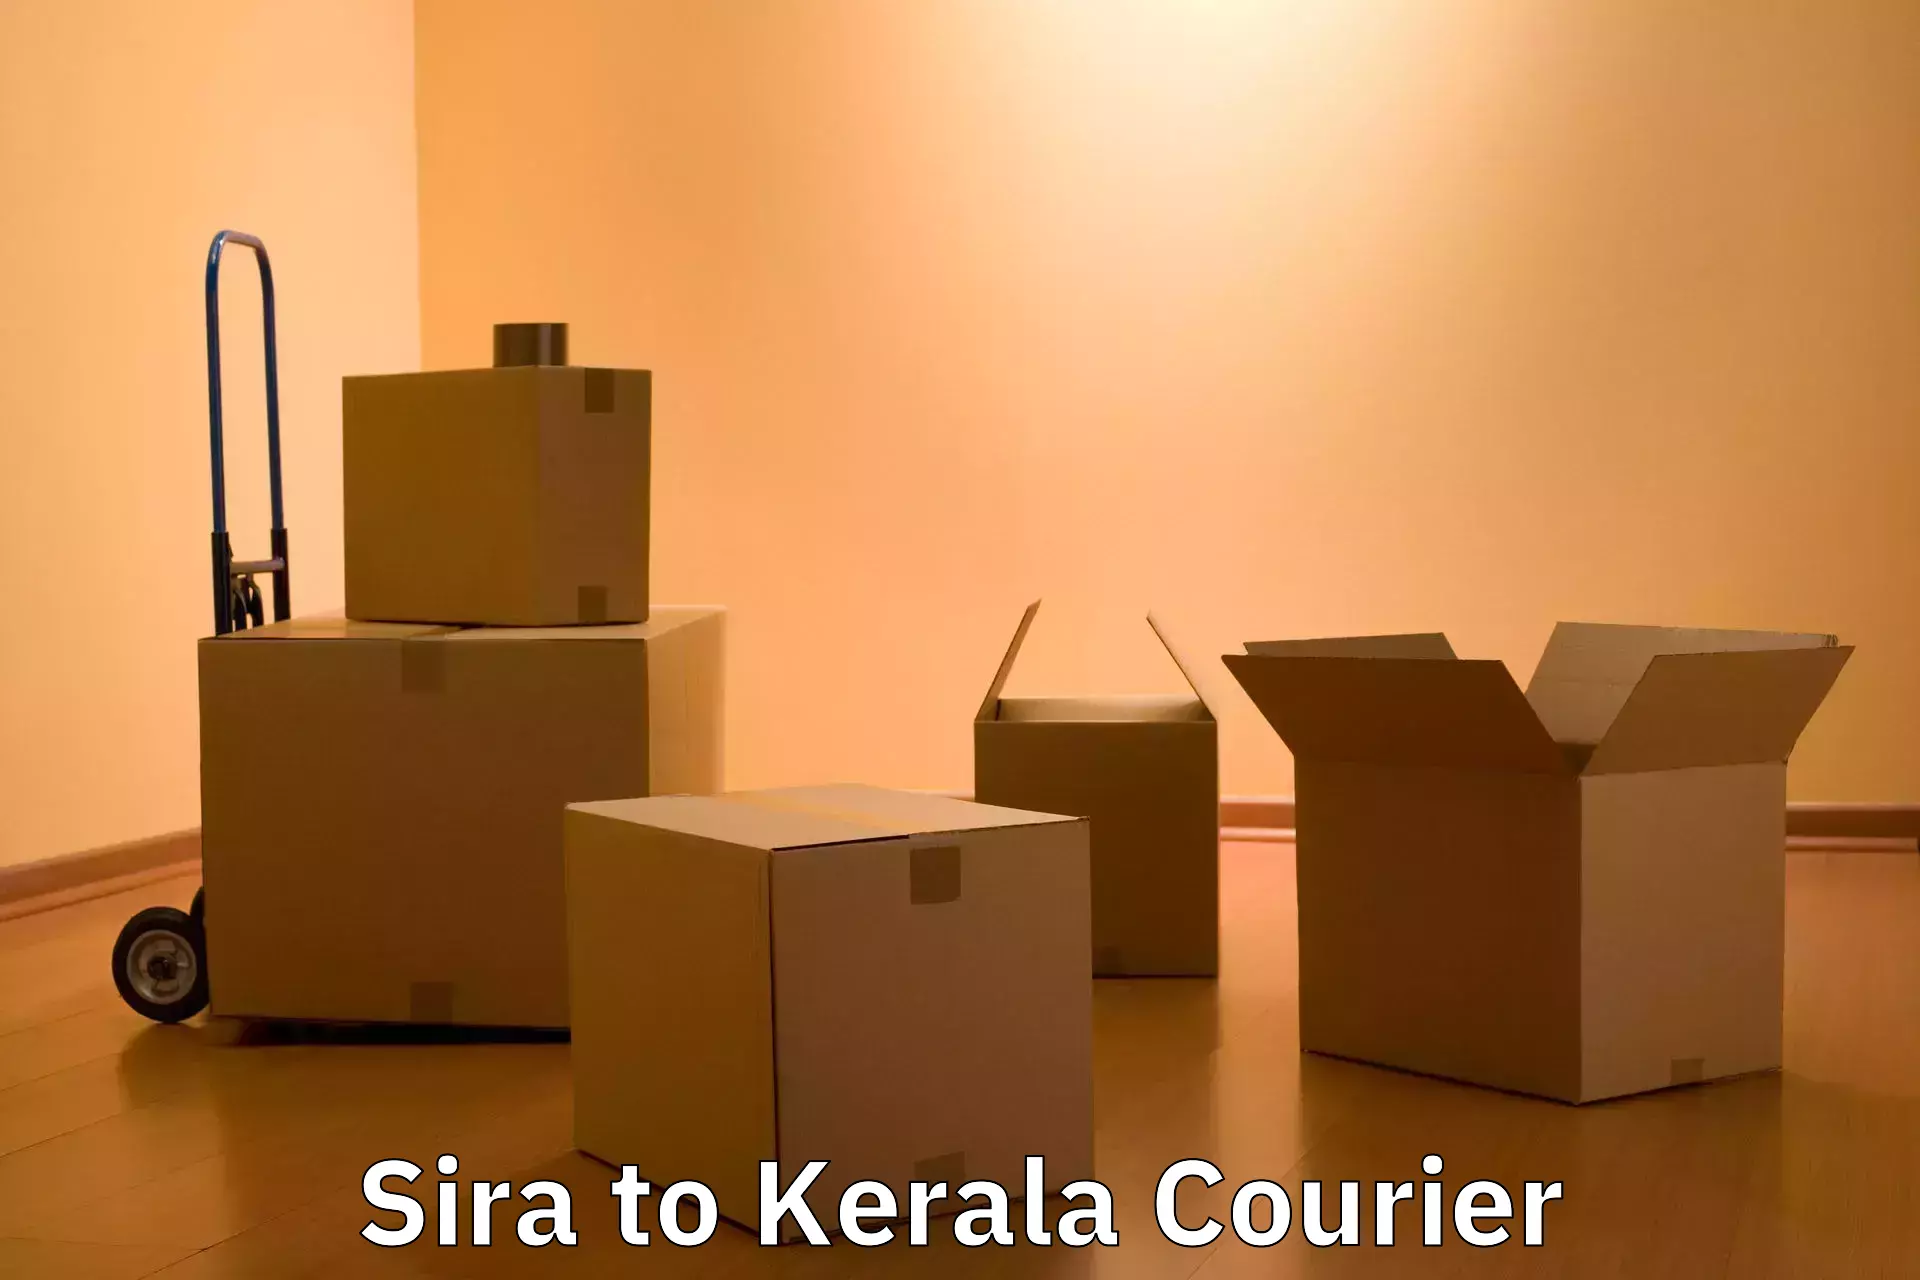 Luggage shipment specialists Sira to Kerala